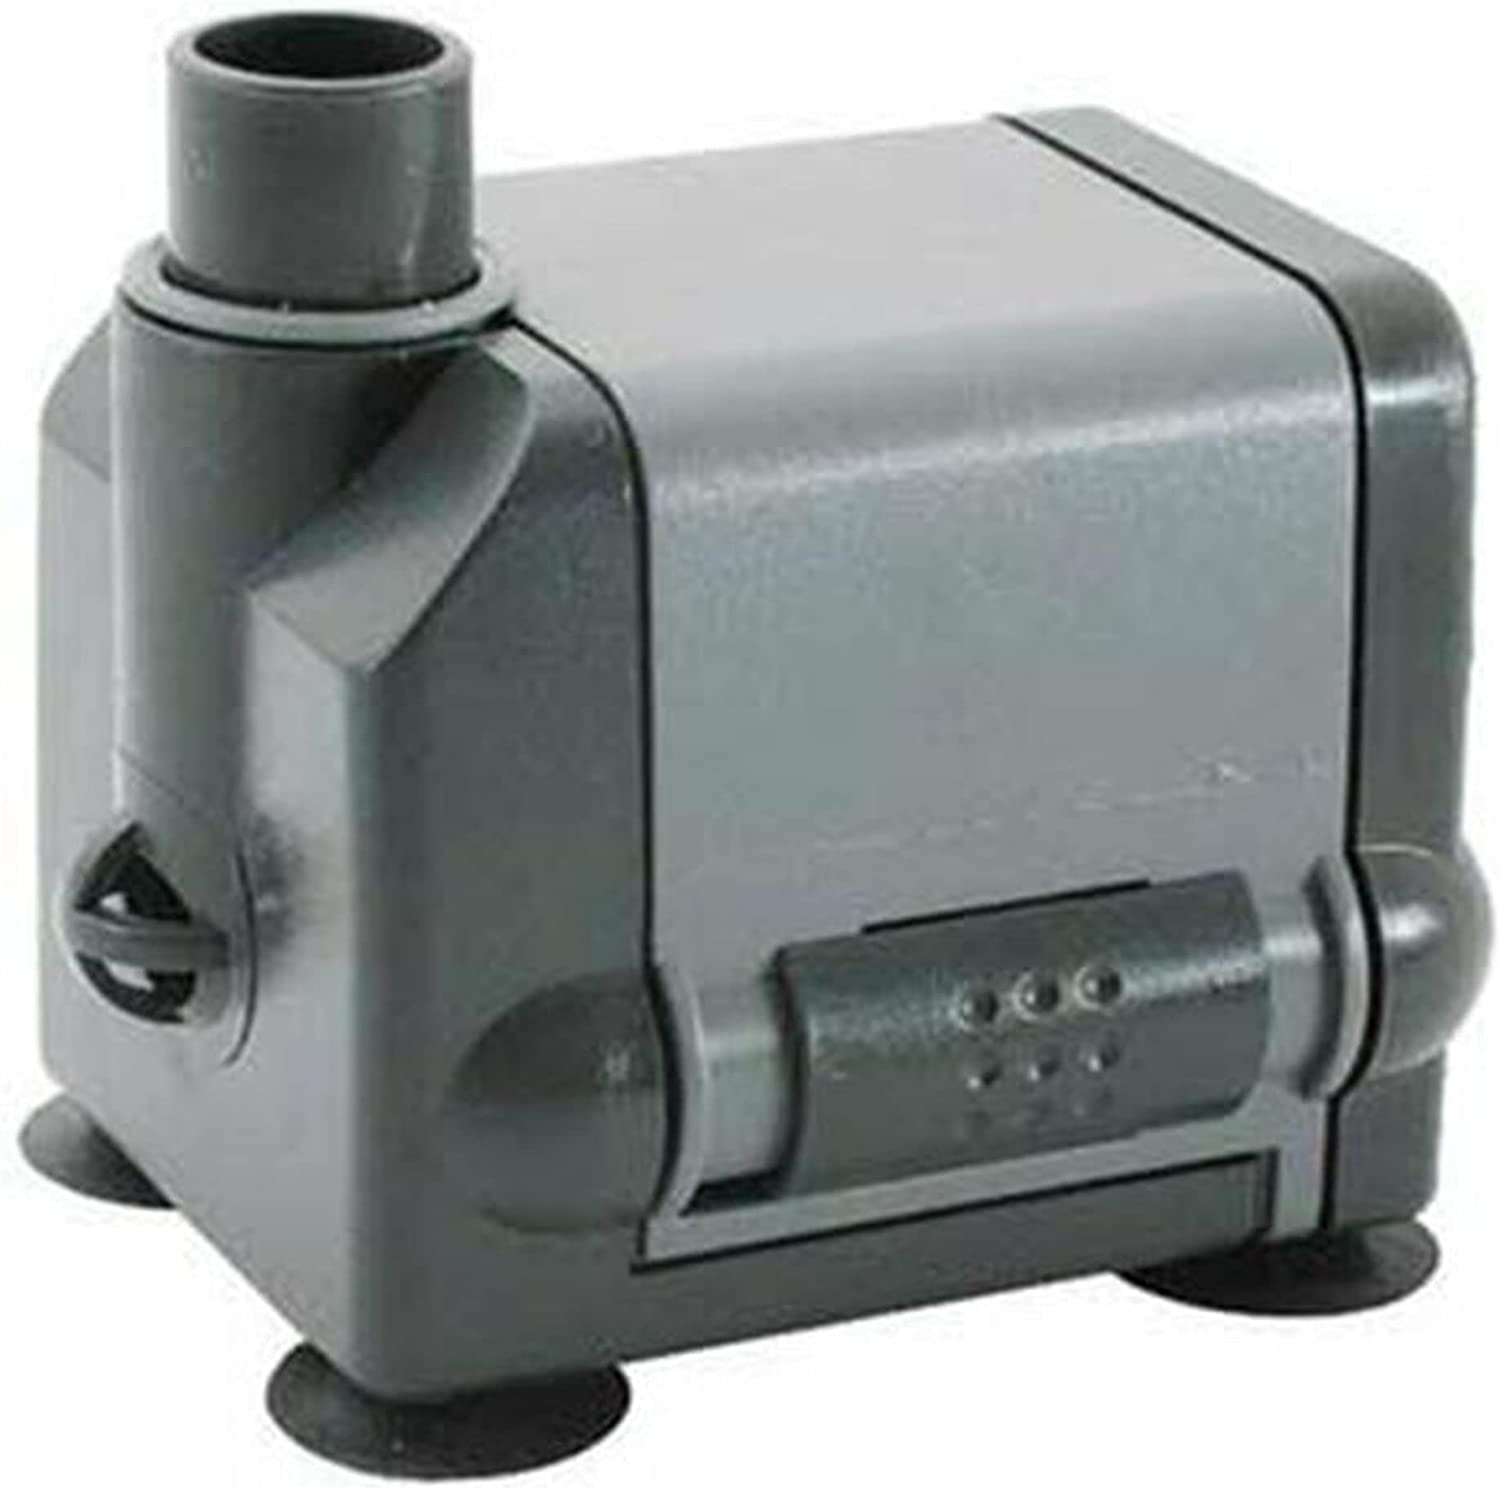 SICCE Micro Compact Aquarium Pump, for submerged use in freshwater and saltwater aquariums